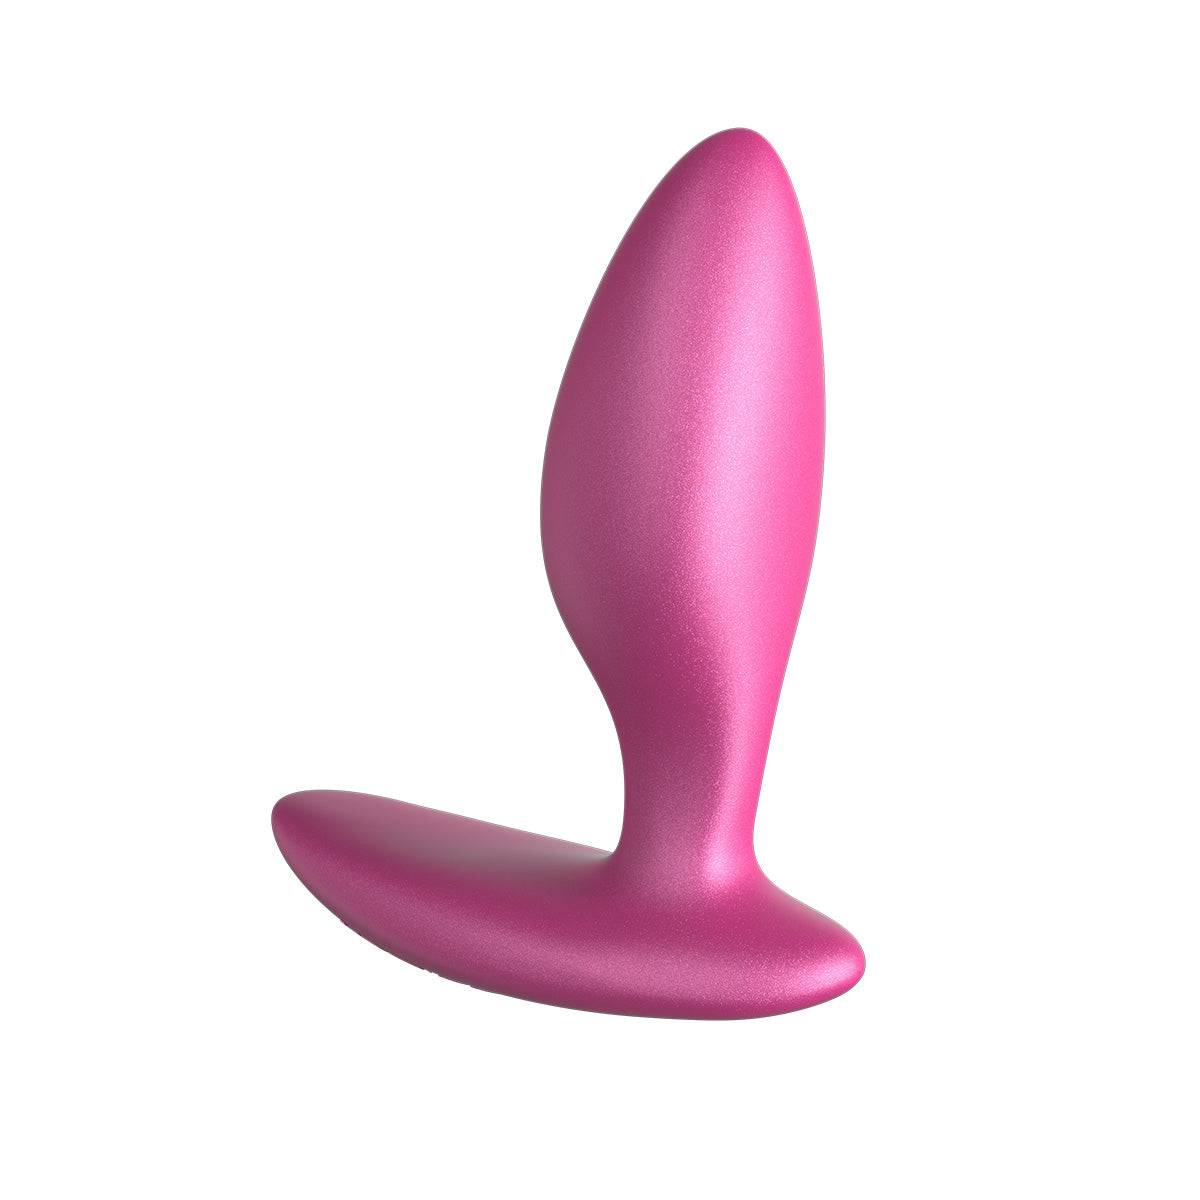 We-Vibe® - Ditto+ - Vibrating Anal Plug with Remote - Cosmic Pink